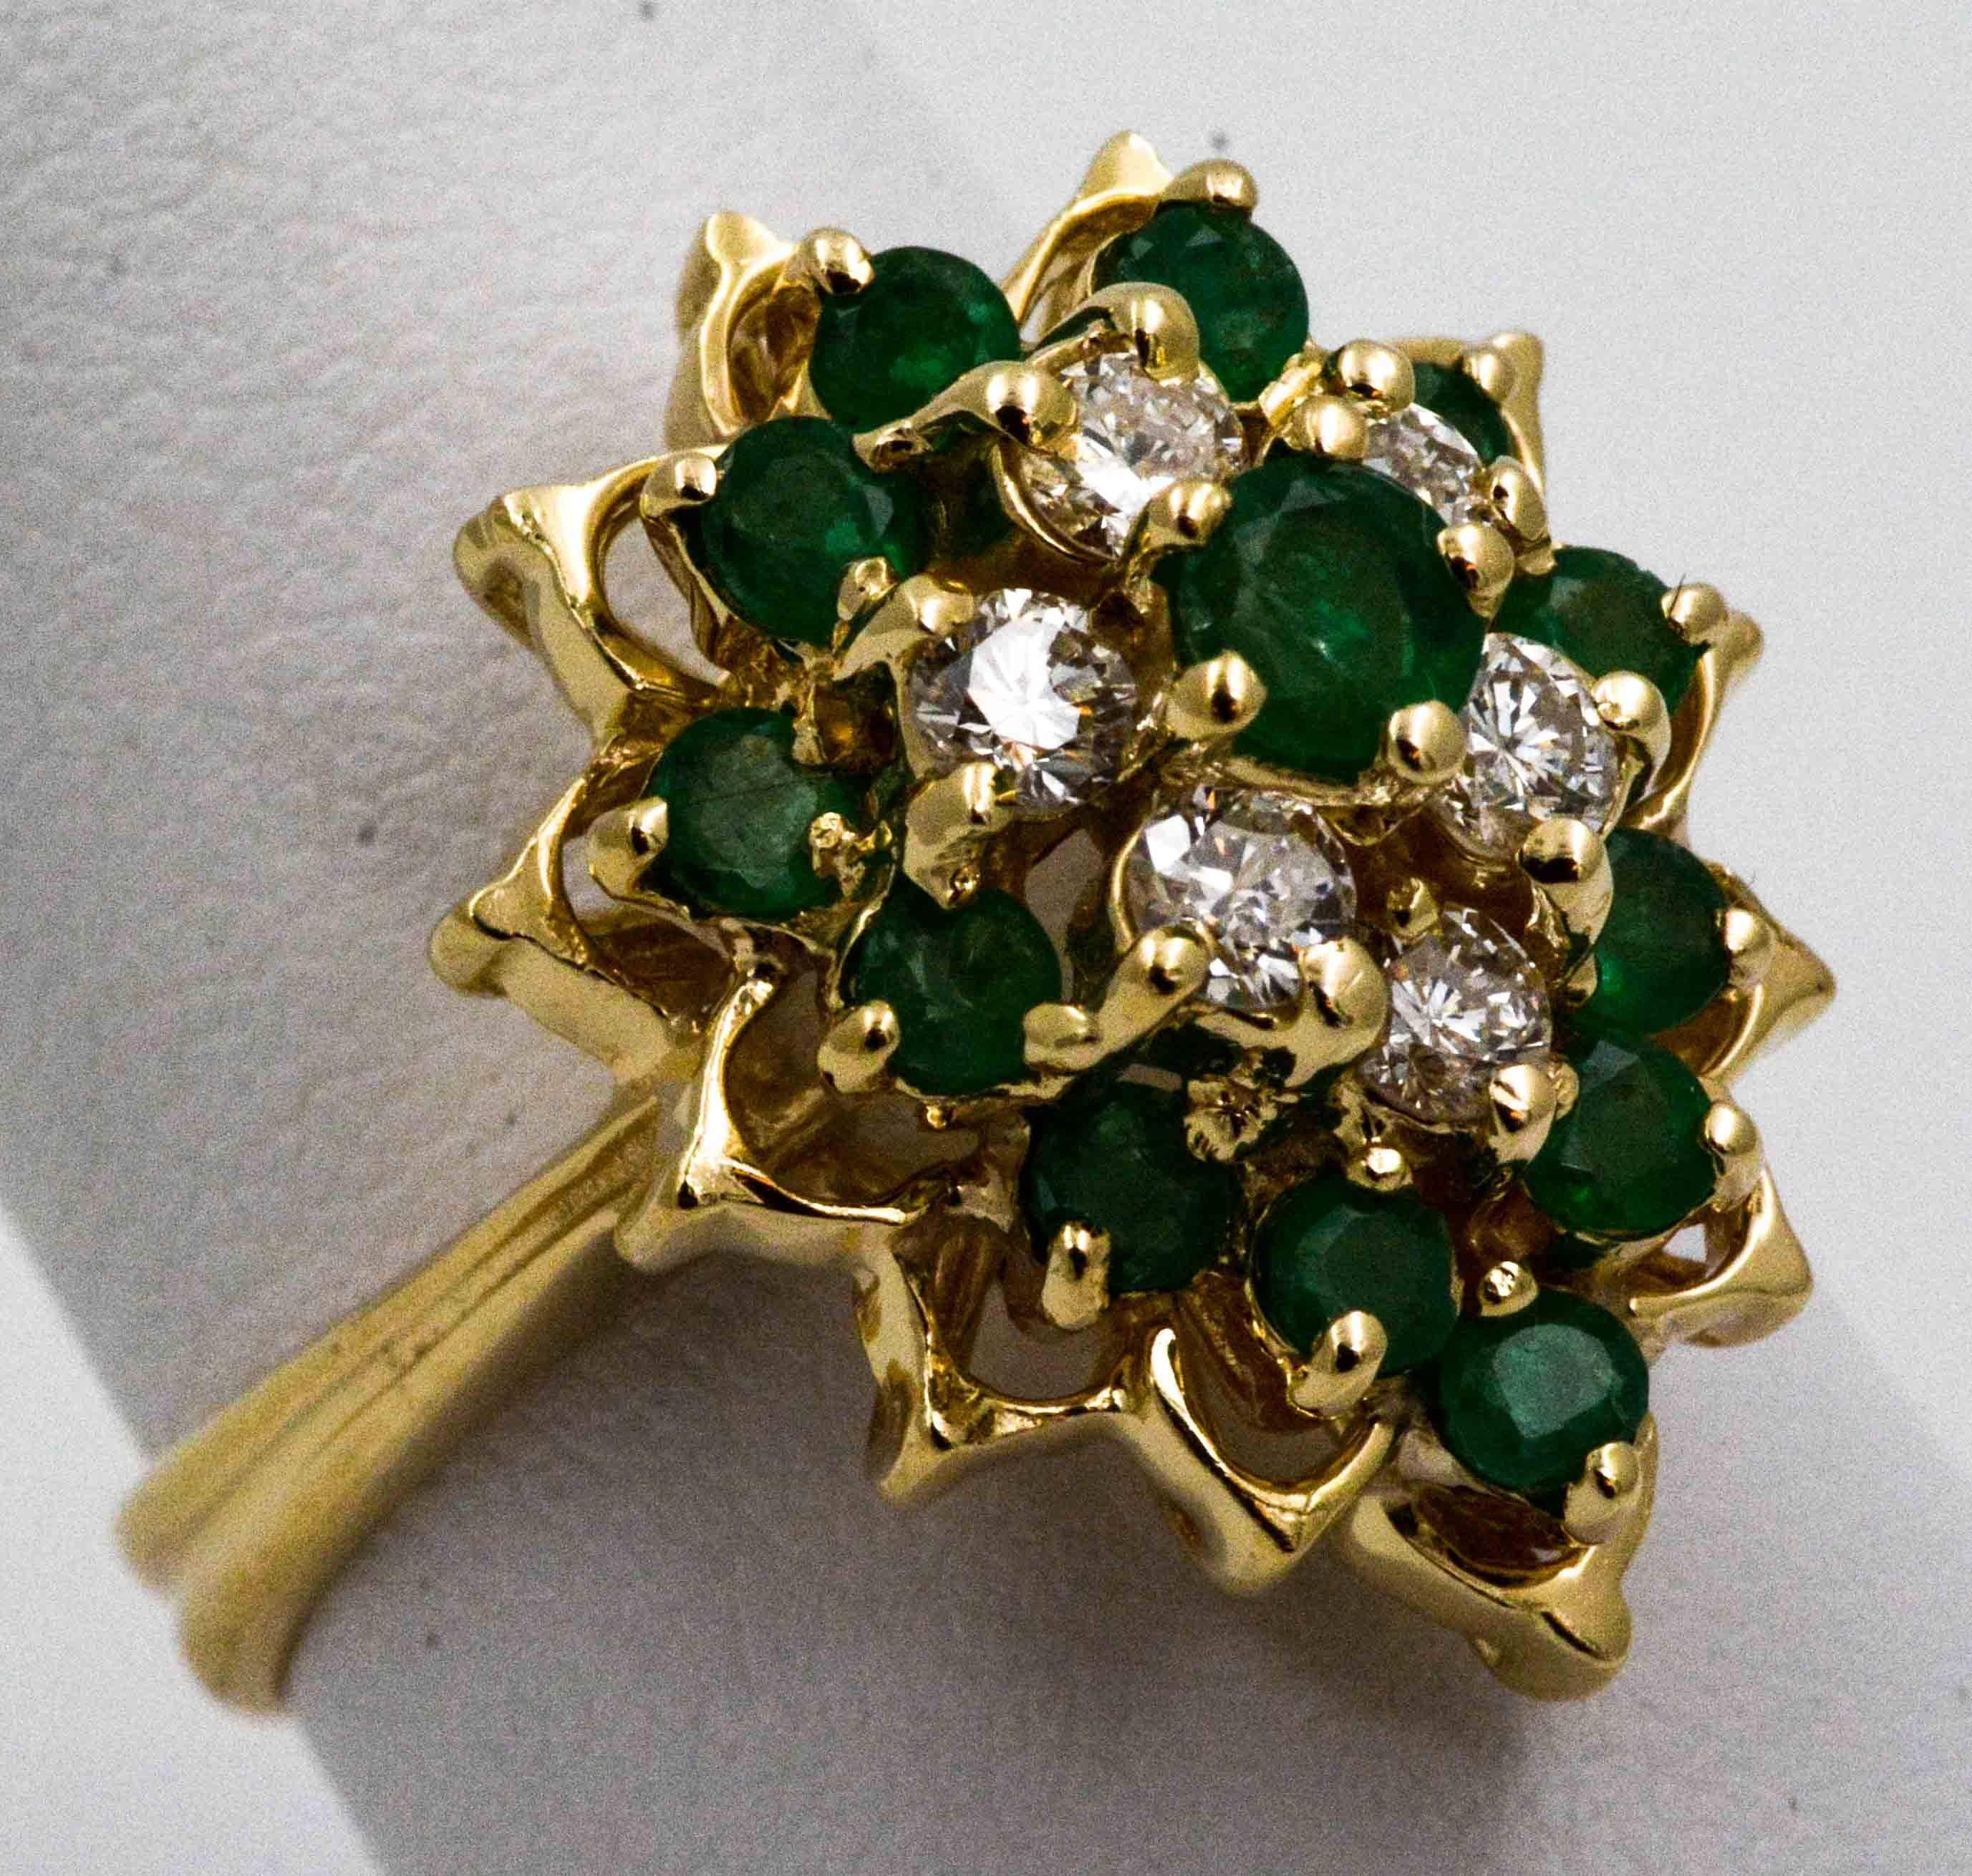 Like a garden of earthly delights, this 14 karat yellow gold cocktail ring has plenty of style. The cluster of alluring diamonds (0.60 ctw G-H color and SI clarity) add scintillating sparkle to the 13 round emeralds (0.50 ctw) in this cocktail